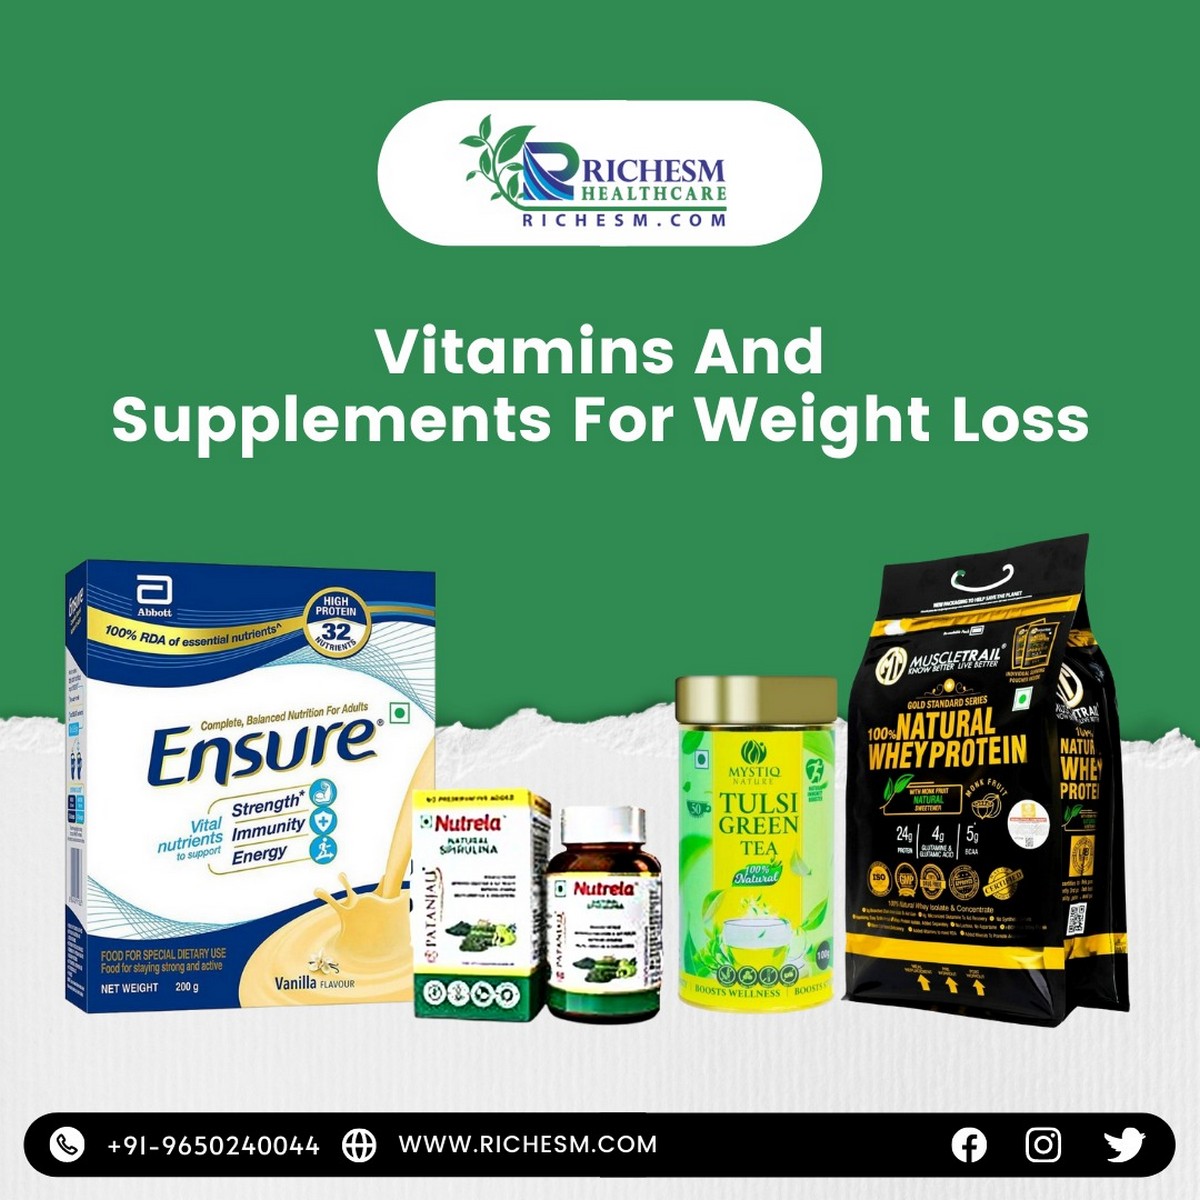 Vitamins And Supplements For Weight Loss Health and Nutrition Vitamins And Supplements For Weight Loss